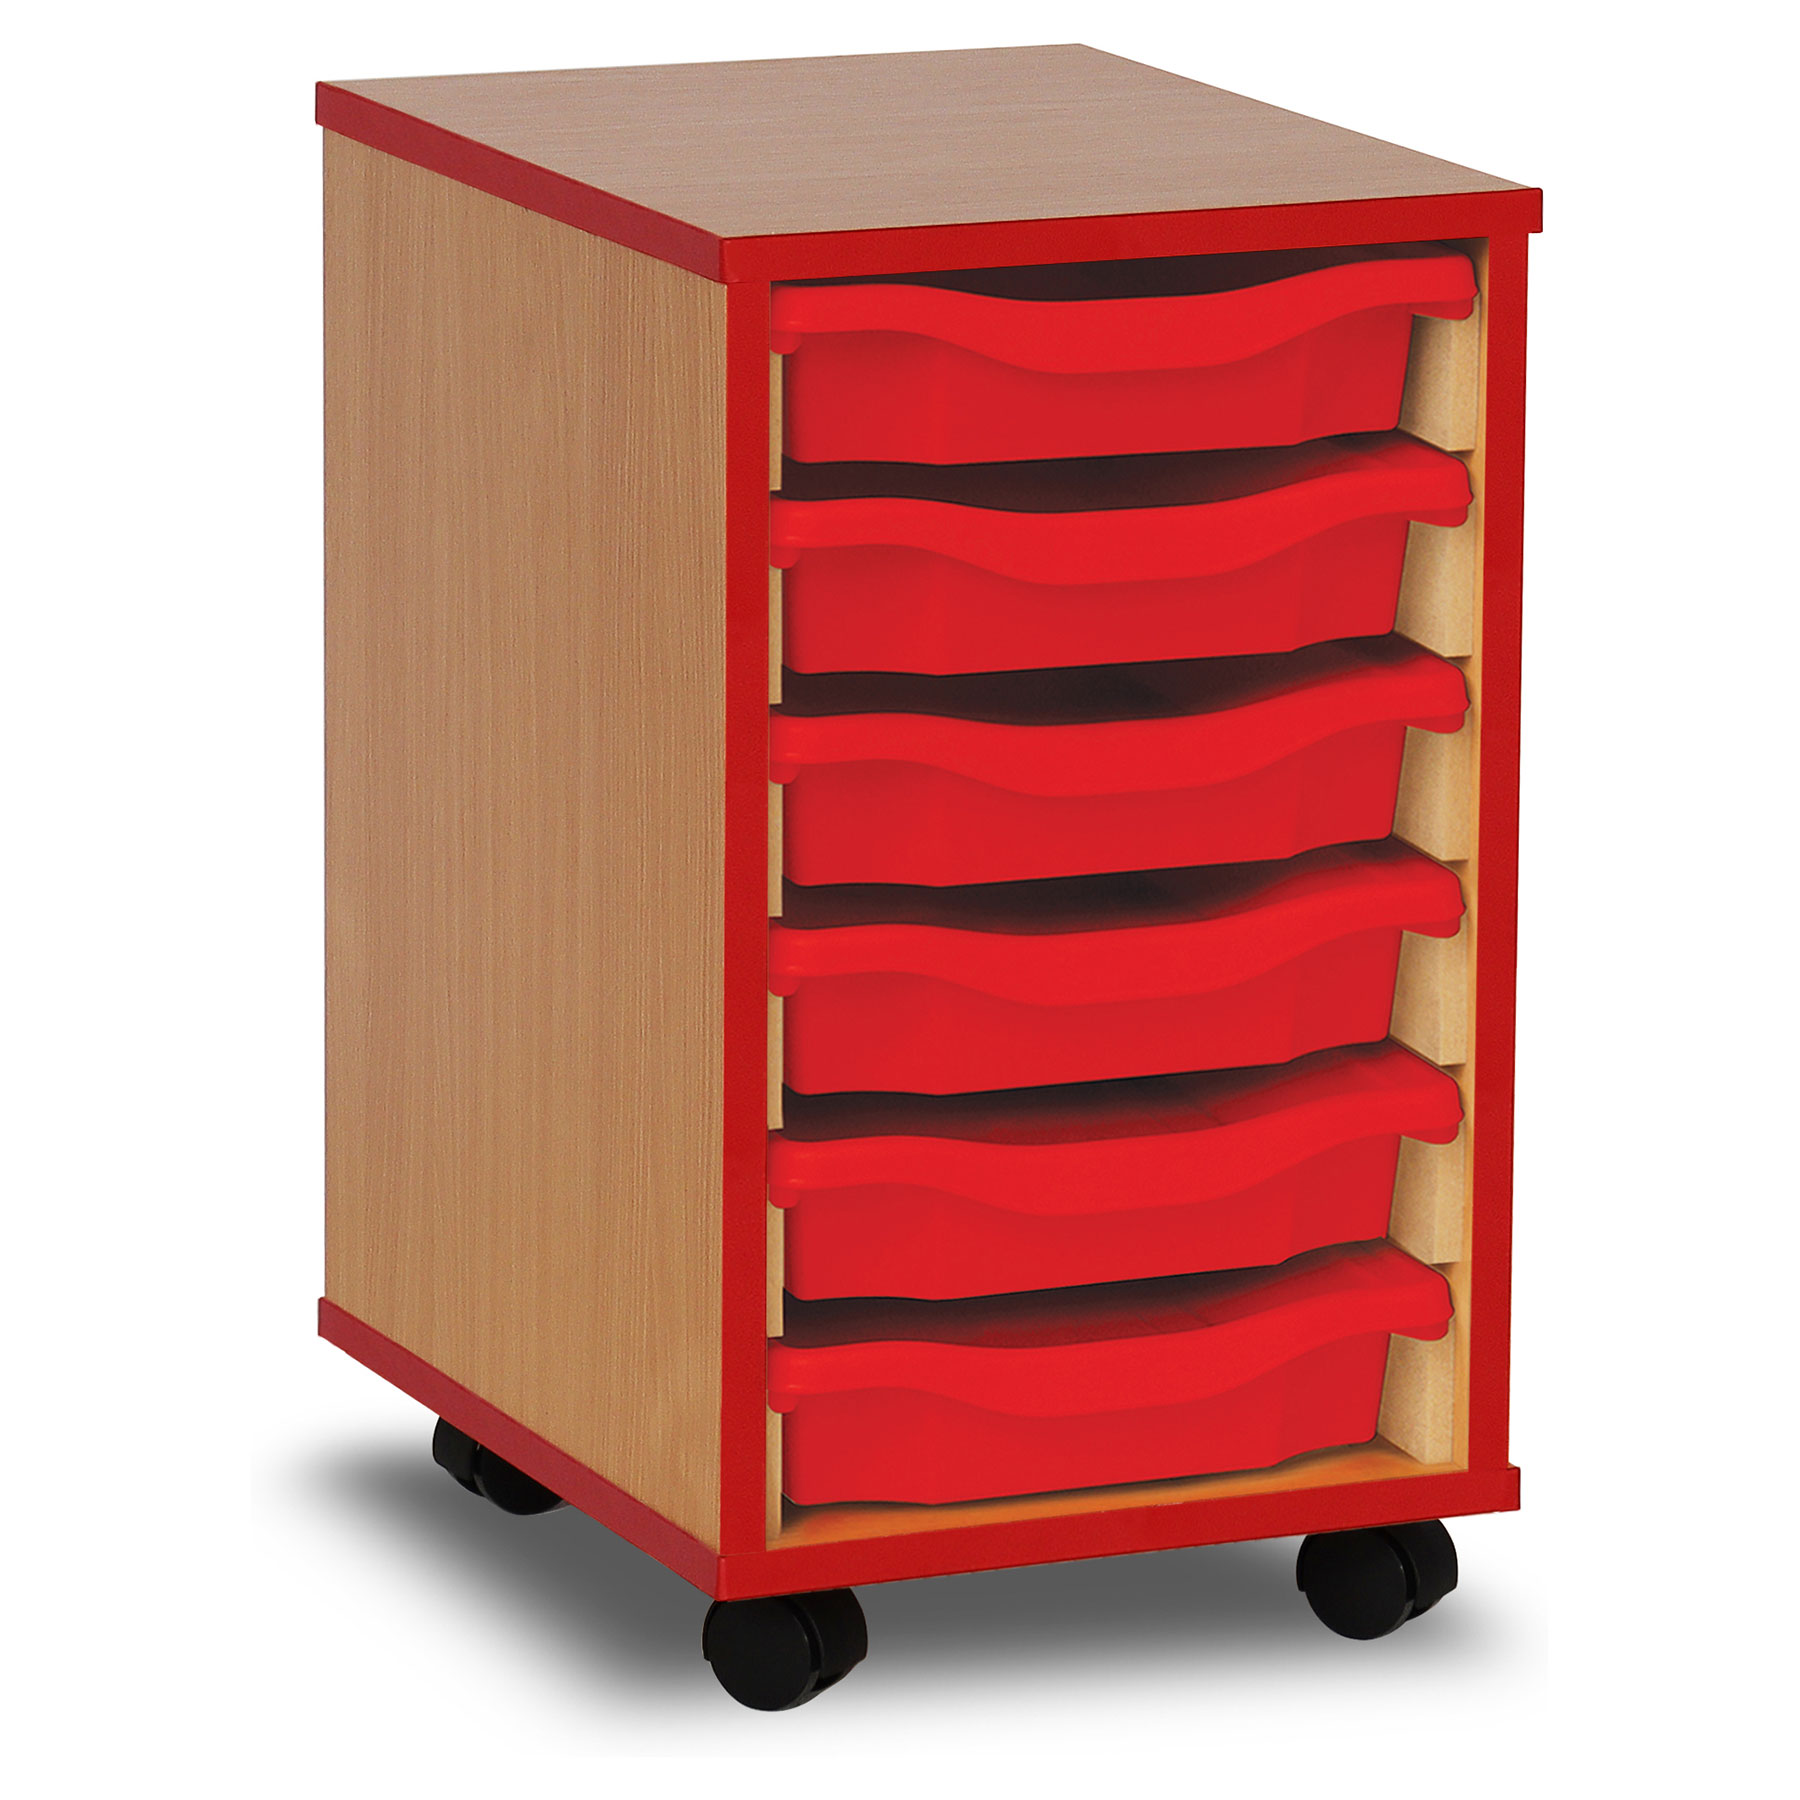 6 Single Tray Unit with Red Edging, Castors & Red Trays